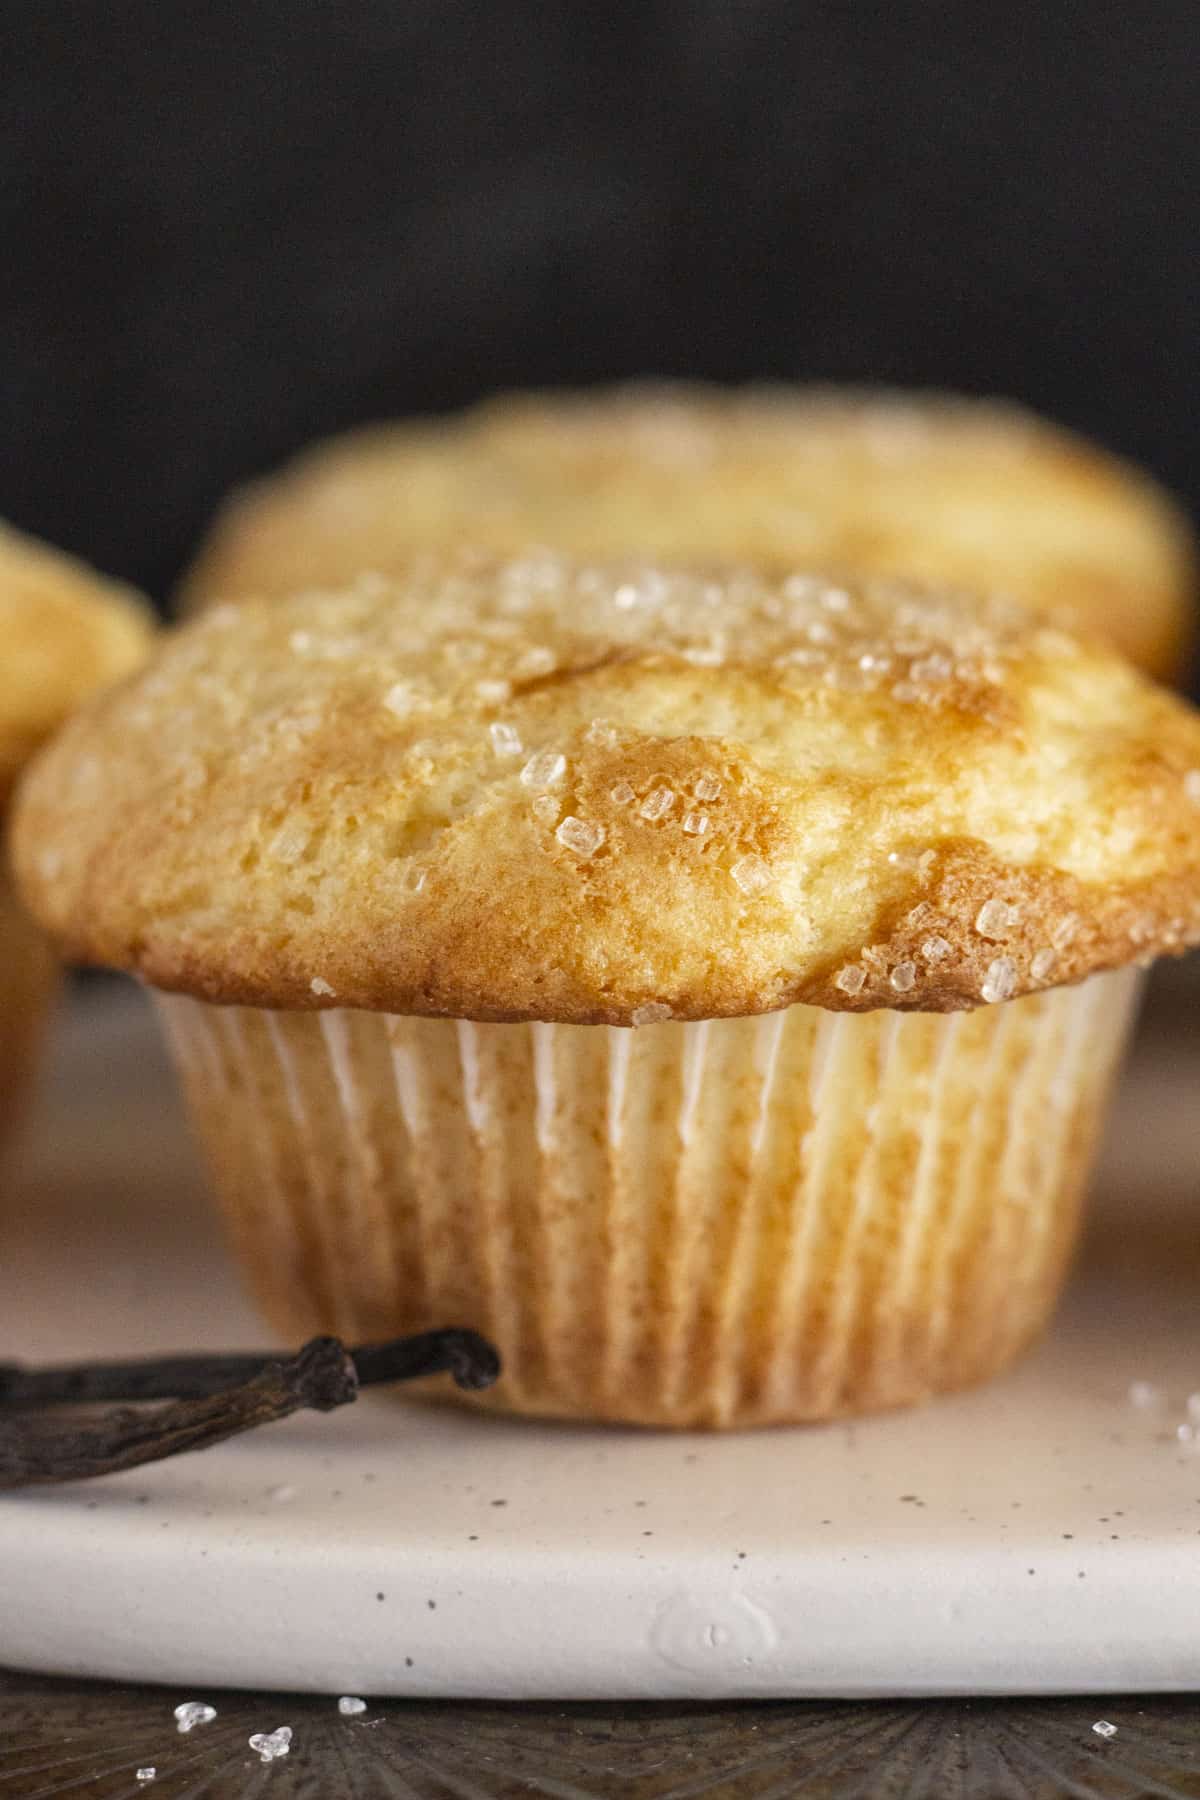 A close up of a freshly baked vanilla muffin.